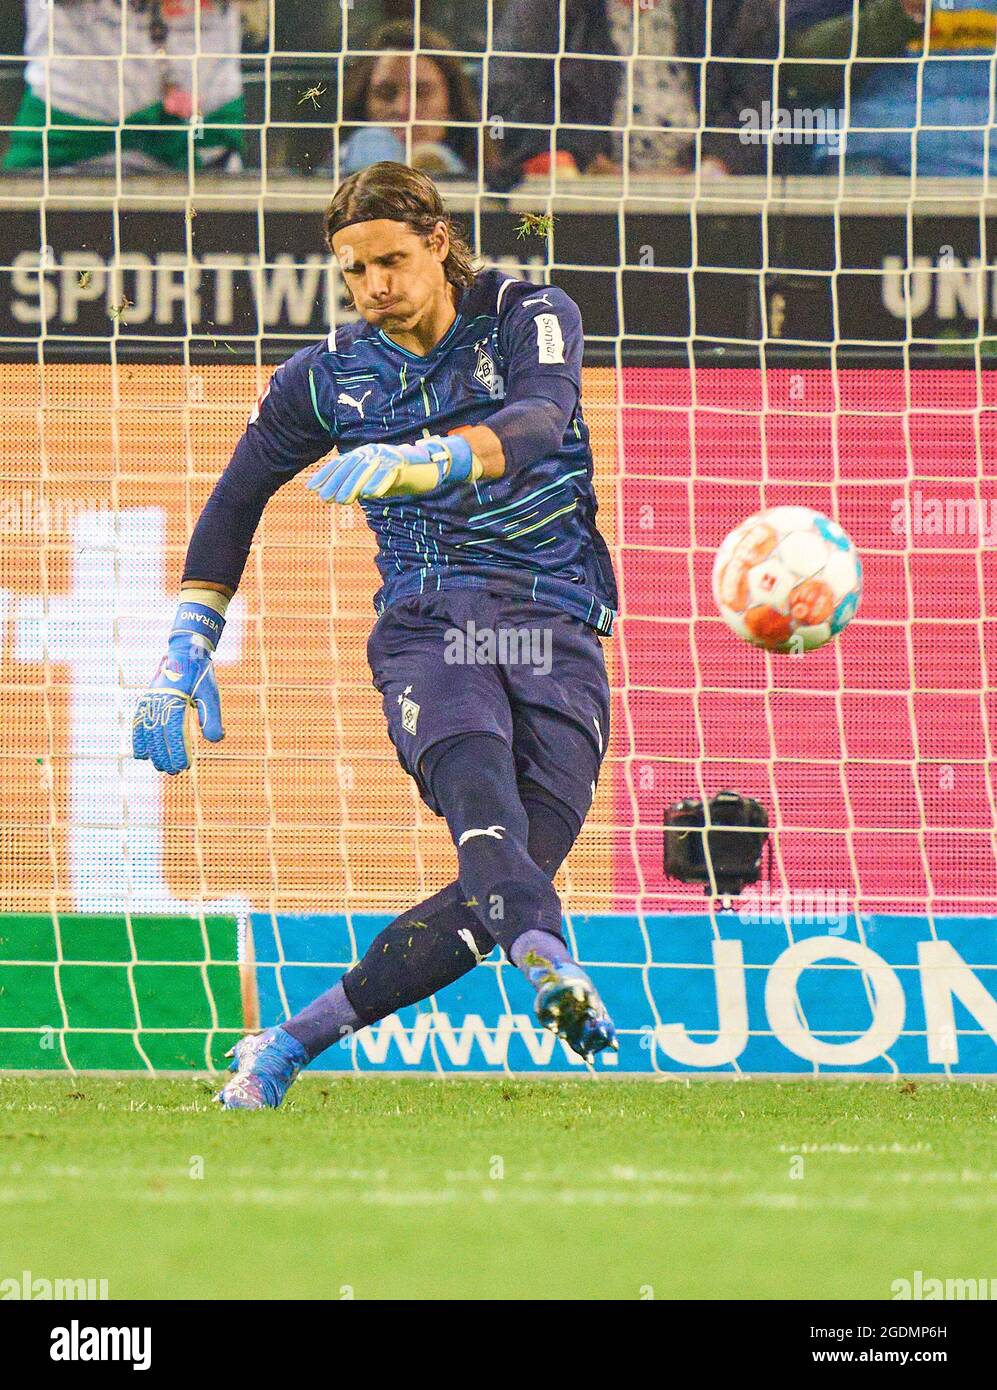 Monchengladbach, Germany. 13th Aug, 2021. Yann SOMMER, MG 1 Abschlag in the match BORUSSIA MÖNCHENGLADBACH - BAYERN MUENCHEN 1-1 1.German Football League on August 13, 2021 in Mönchengladbach, Germany  Season 2020/2021, matchday 1, 1.Bundesliga, FCB, München, 1.Spieltag, Gladbach, Moenchengladbach. © Peter Schatz / Alamy Live News    - DFL REGULATIONS PROHIBIT ANY USE OF PHOTOGRAPHS as IMAGE SEQUENCES and/or QUASI-VIDEO - Credit: Peter Schatz/Alamy Live News Stock Photo